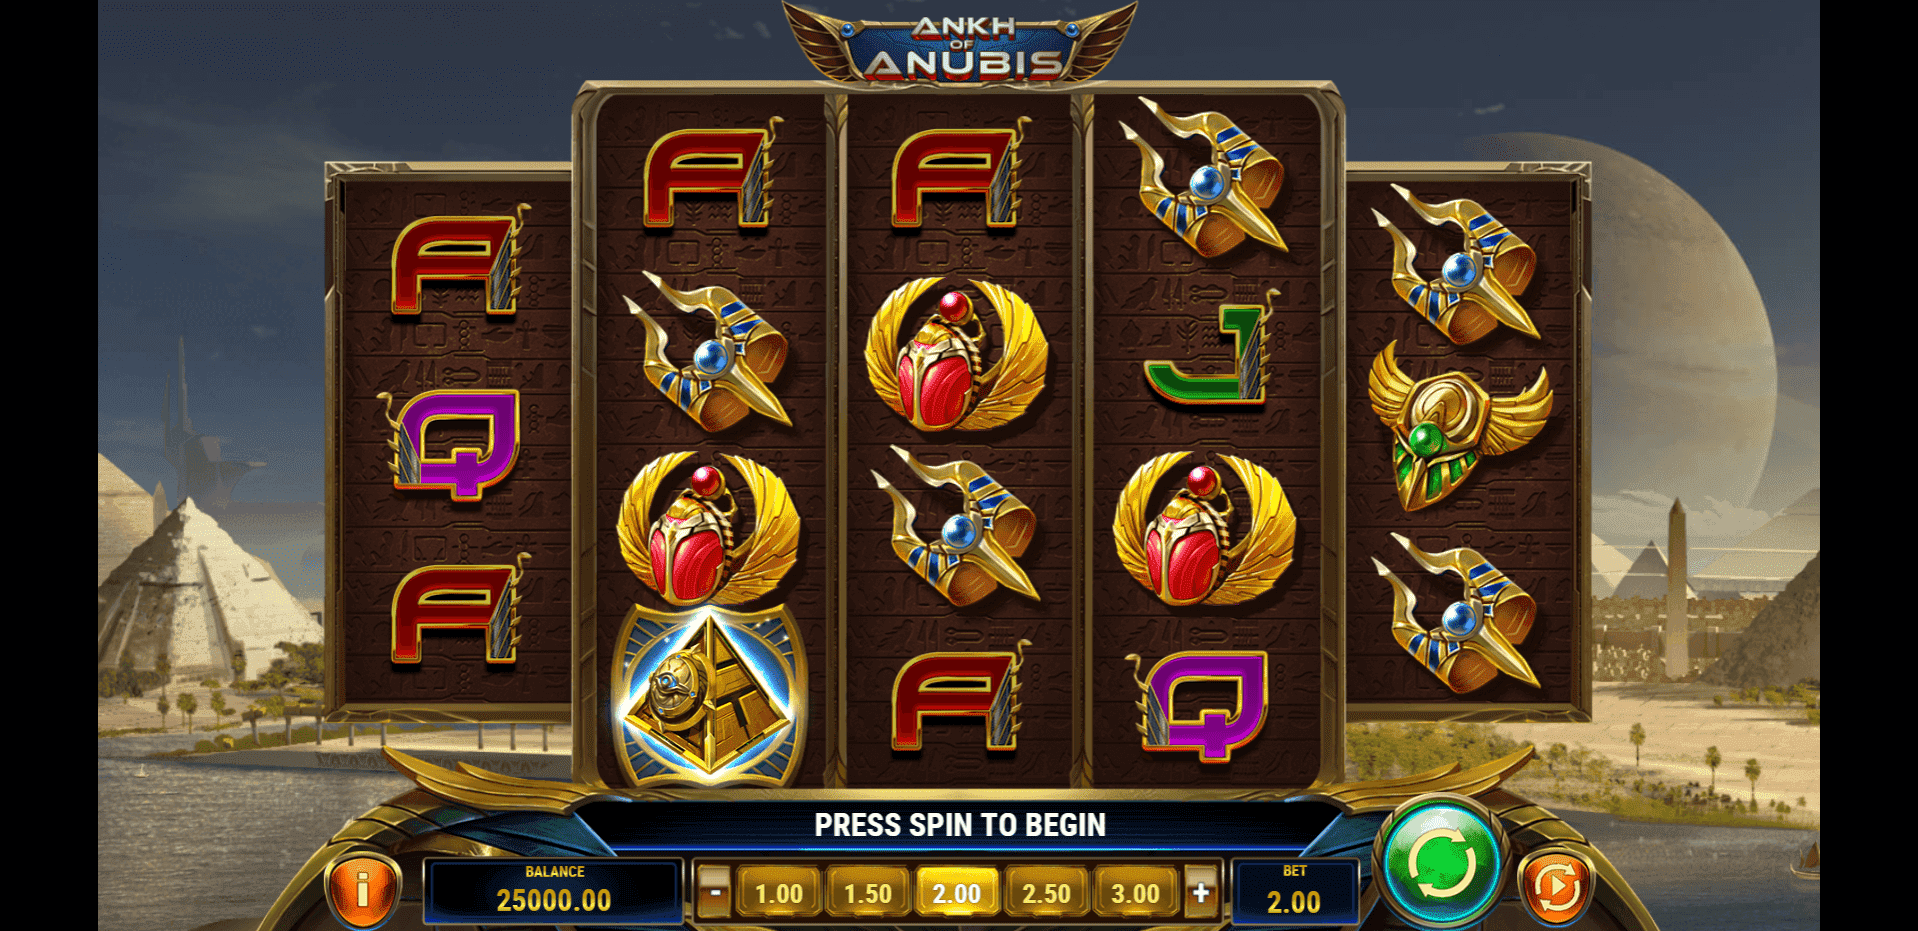 Ankh of Anubis Slot Machine ᗎ Play FREE Casino Game Online by Play’n GO